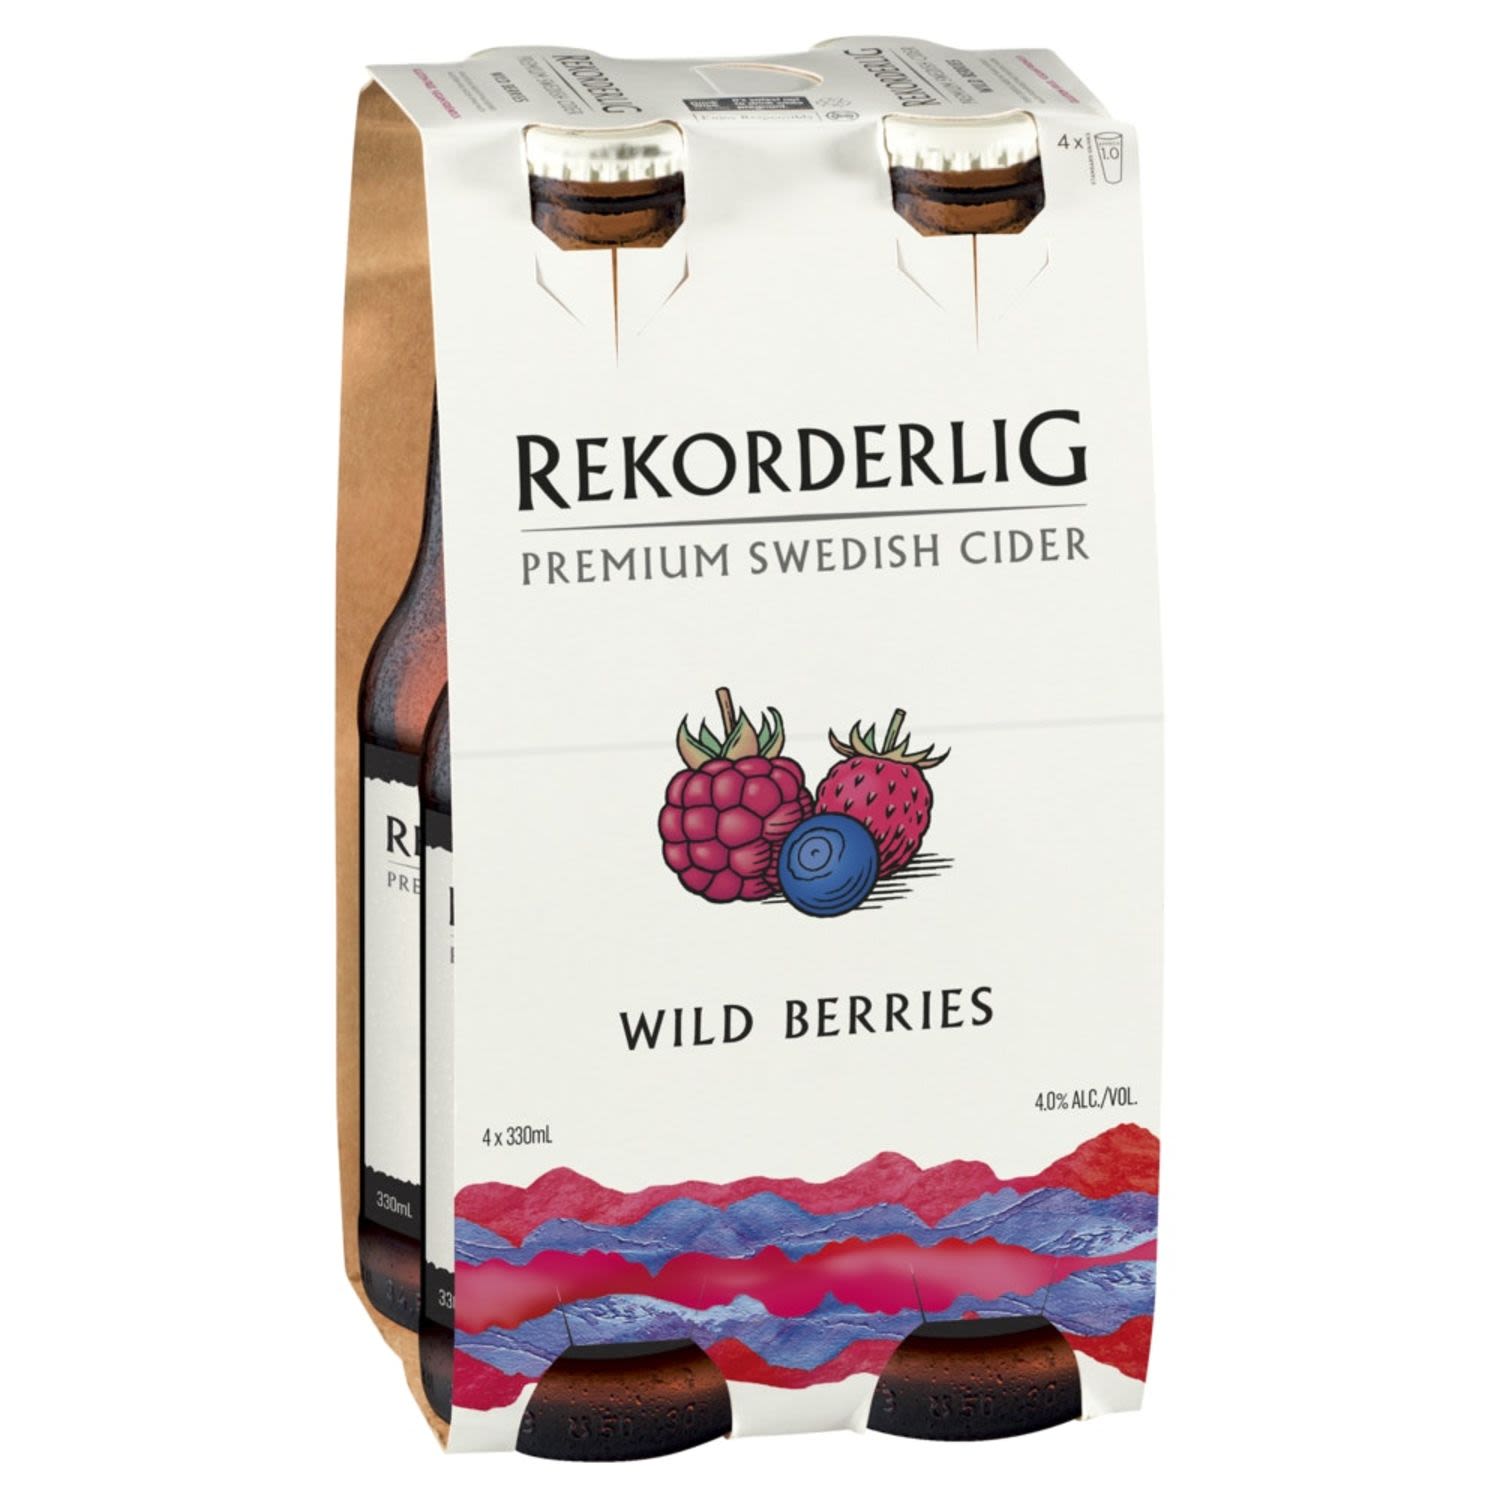 Rekorderlig Wild Berries Cider displays notes of juicy, wild country fruits such as blueberry, raspberry and strawberry. This semi-sweet cider produces a slightly drier finish on the palate, and perfect for those summer picnics.<br /> <br />Alcohol Volume: 4.00%<br /><br />Pack Format: 4 Pack<br /><br />Standard Drinks: 1</br /><br />Pack Type: Bottle<br /><br />Country of Origin: Sweden<br />